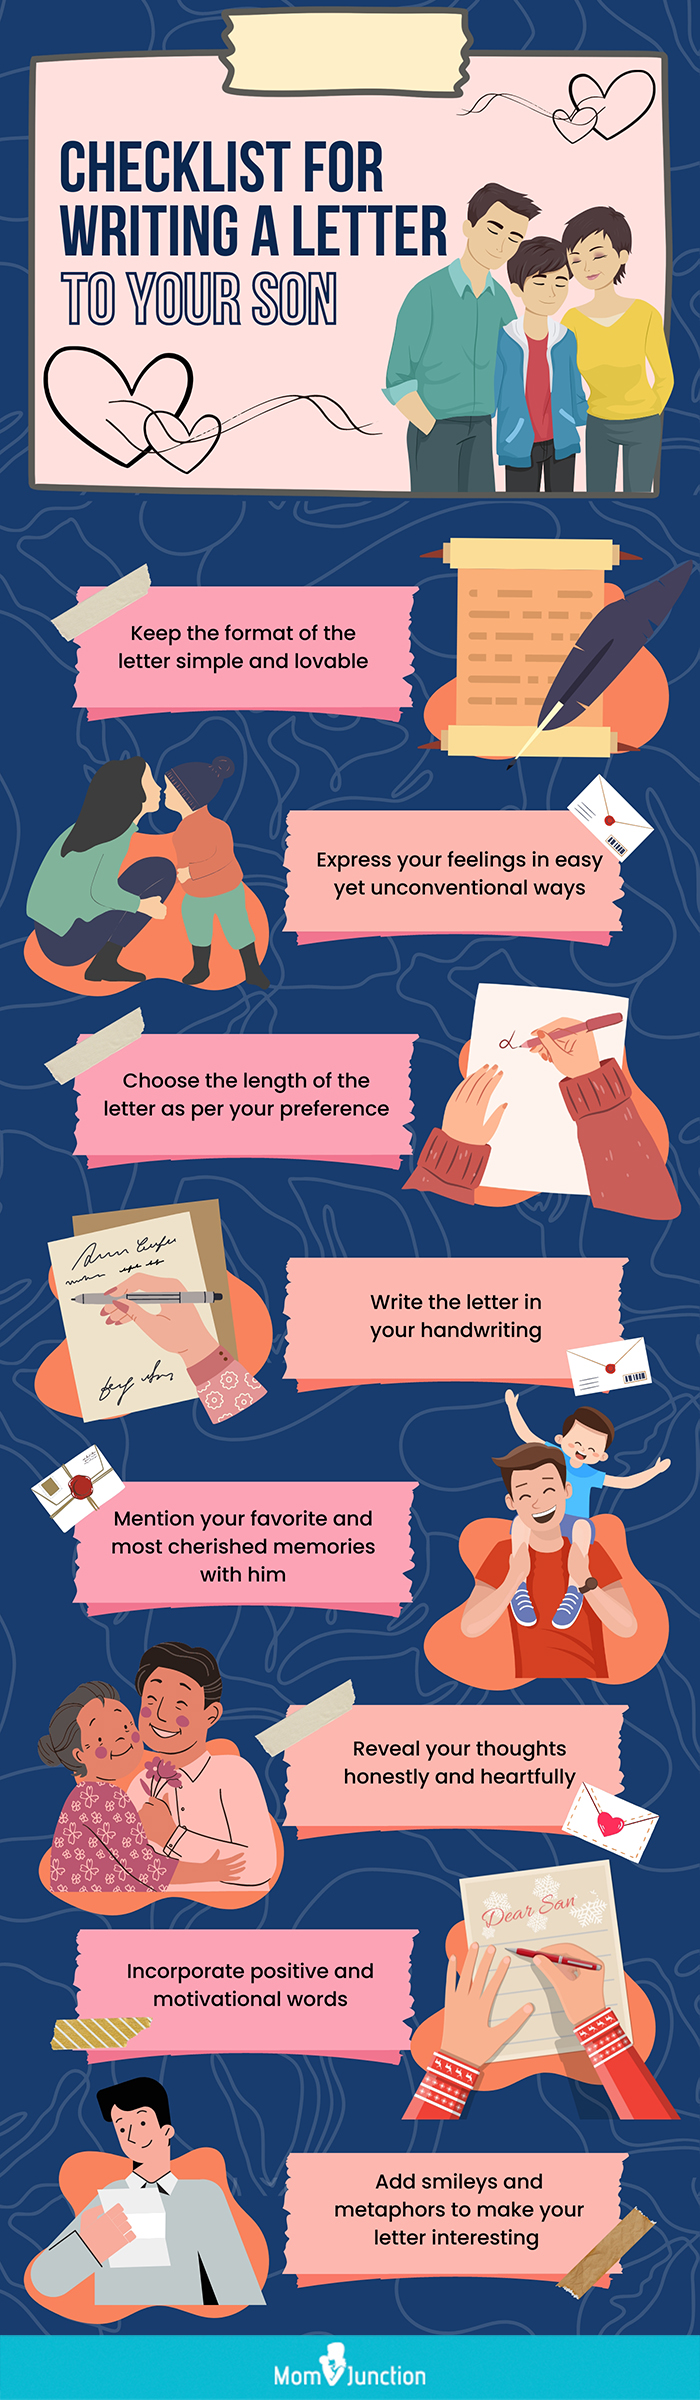 checklist for writing a letter to your son (infographic)